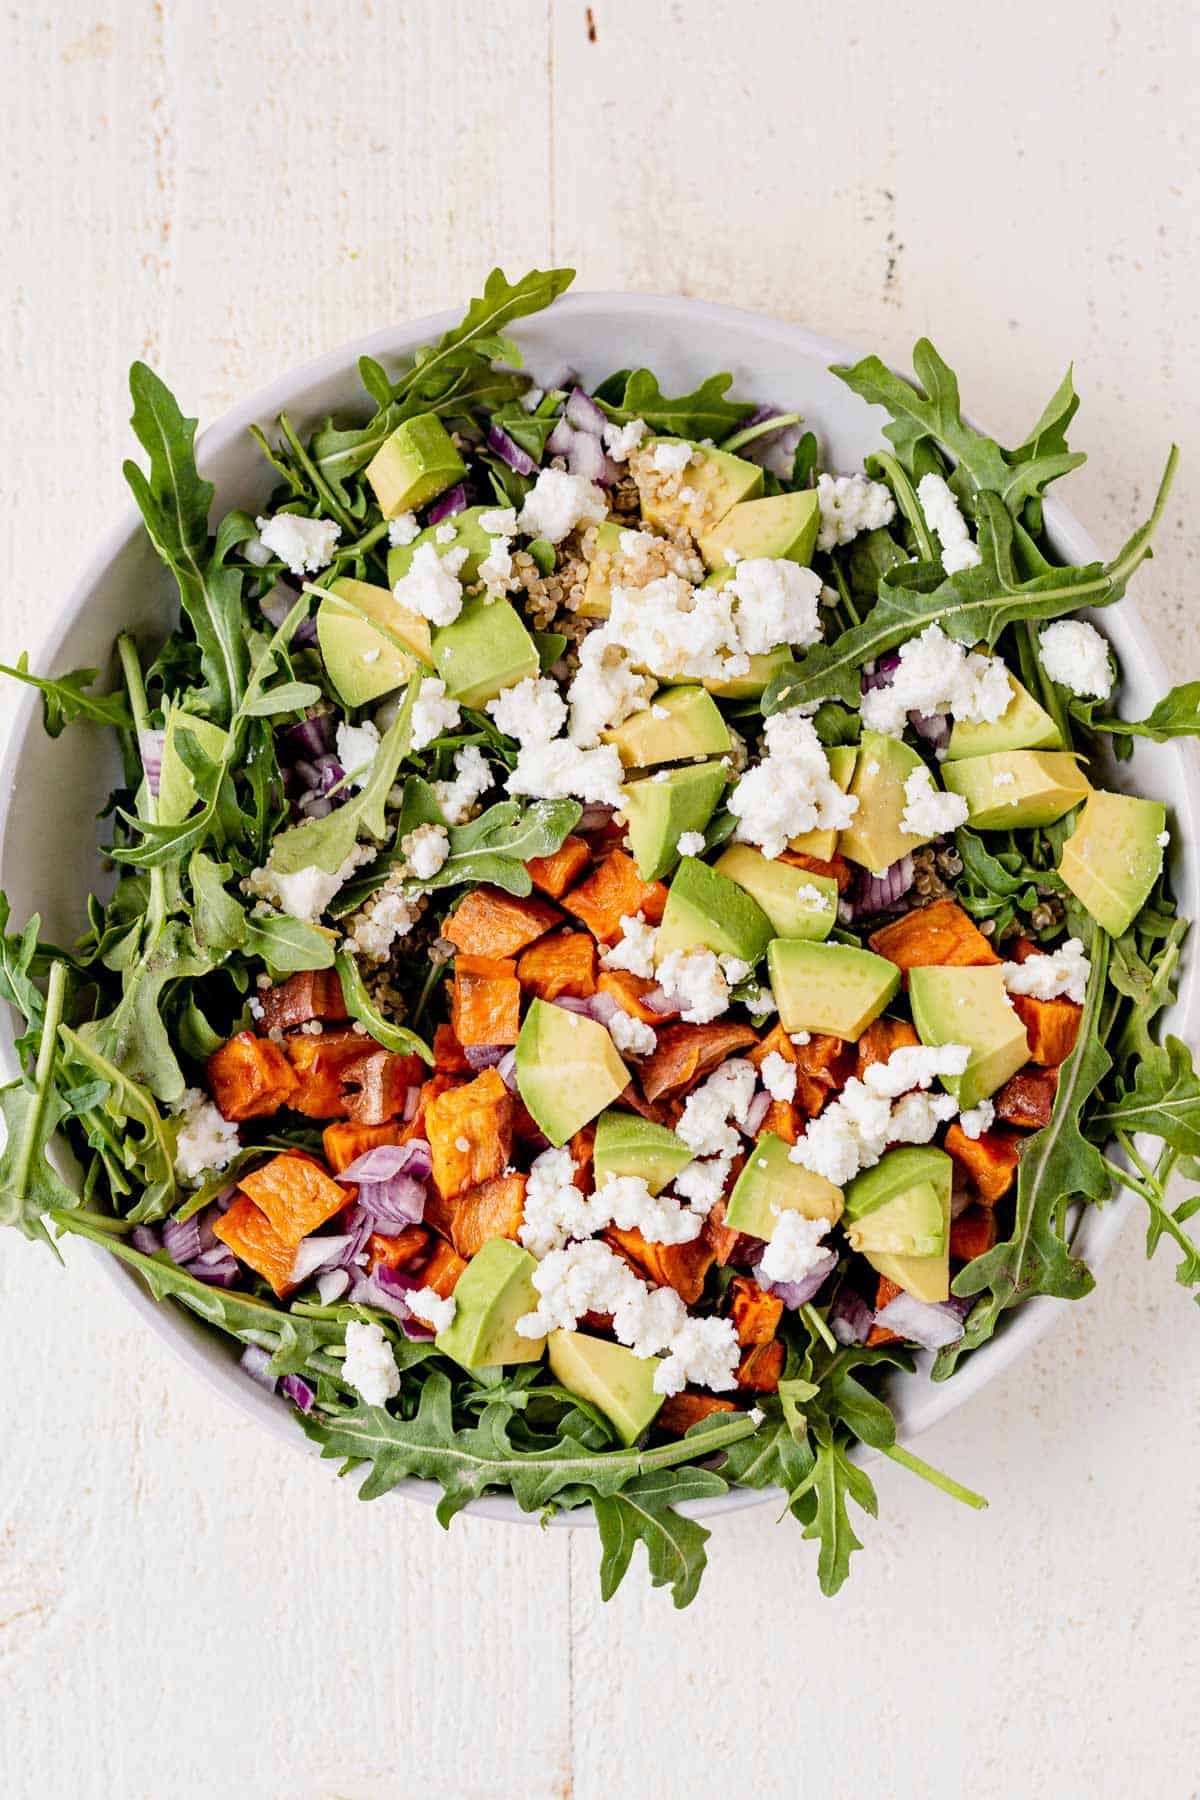 sweet potatoes, avocado, goat cheese, red onion on top of arugula